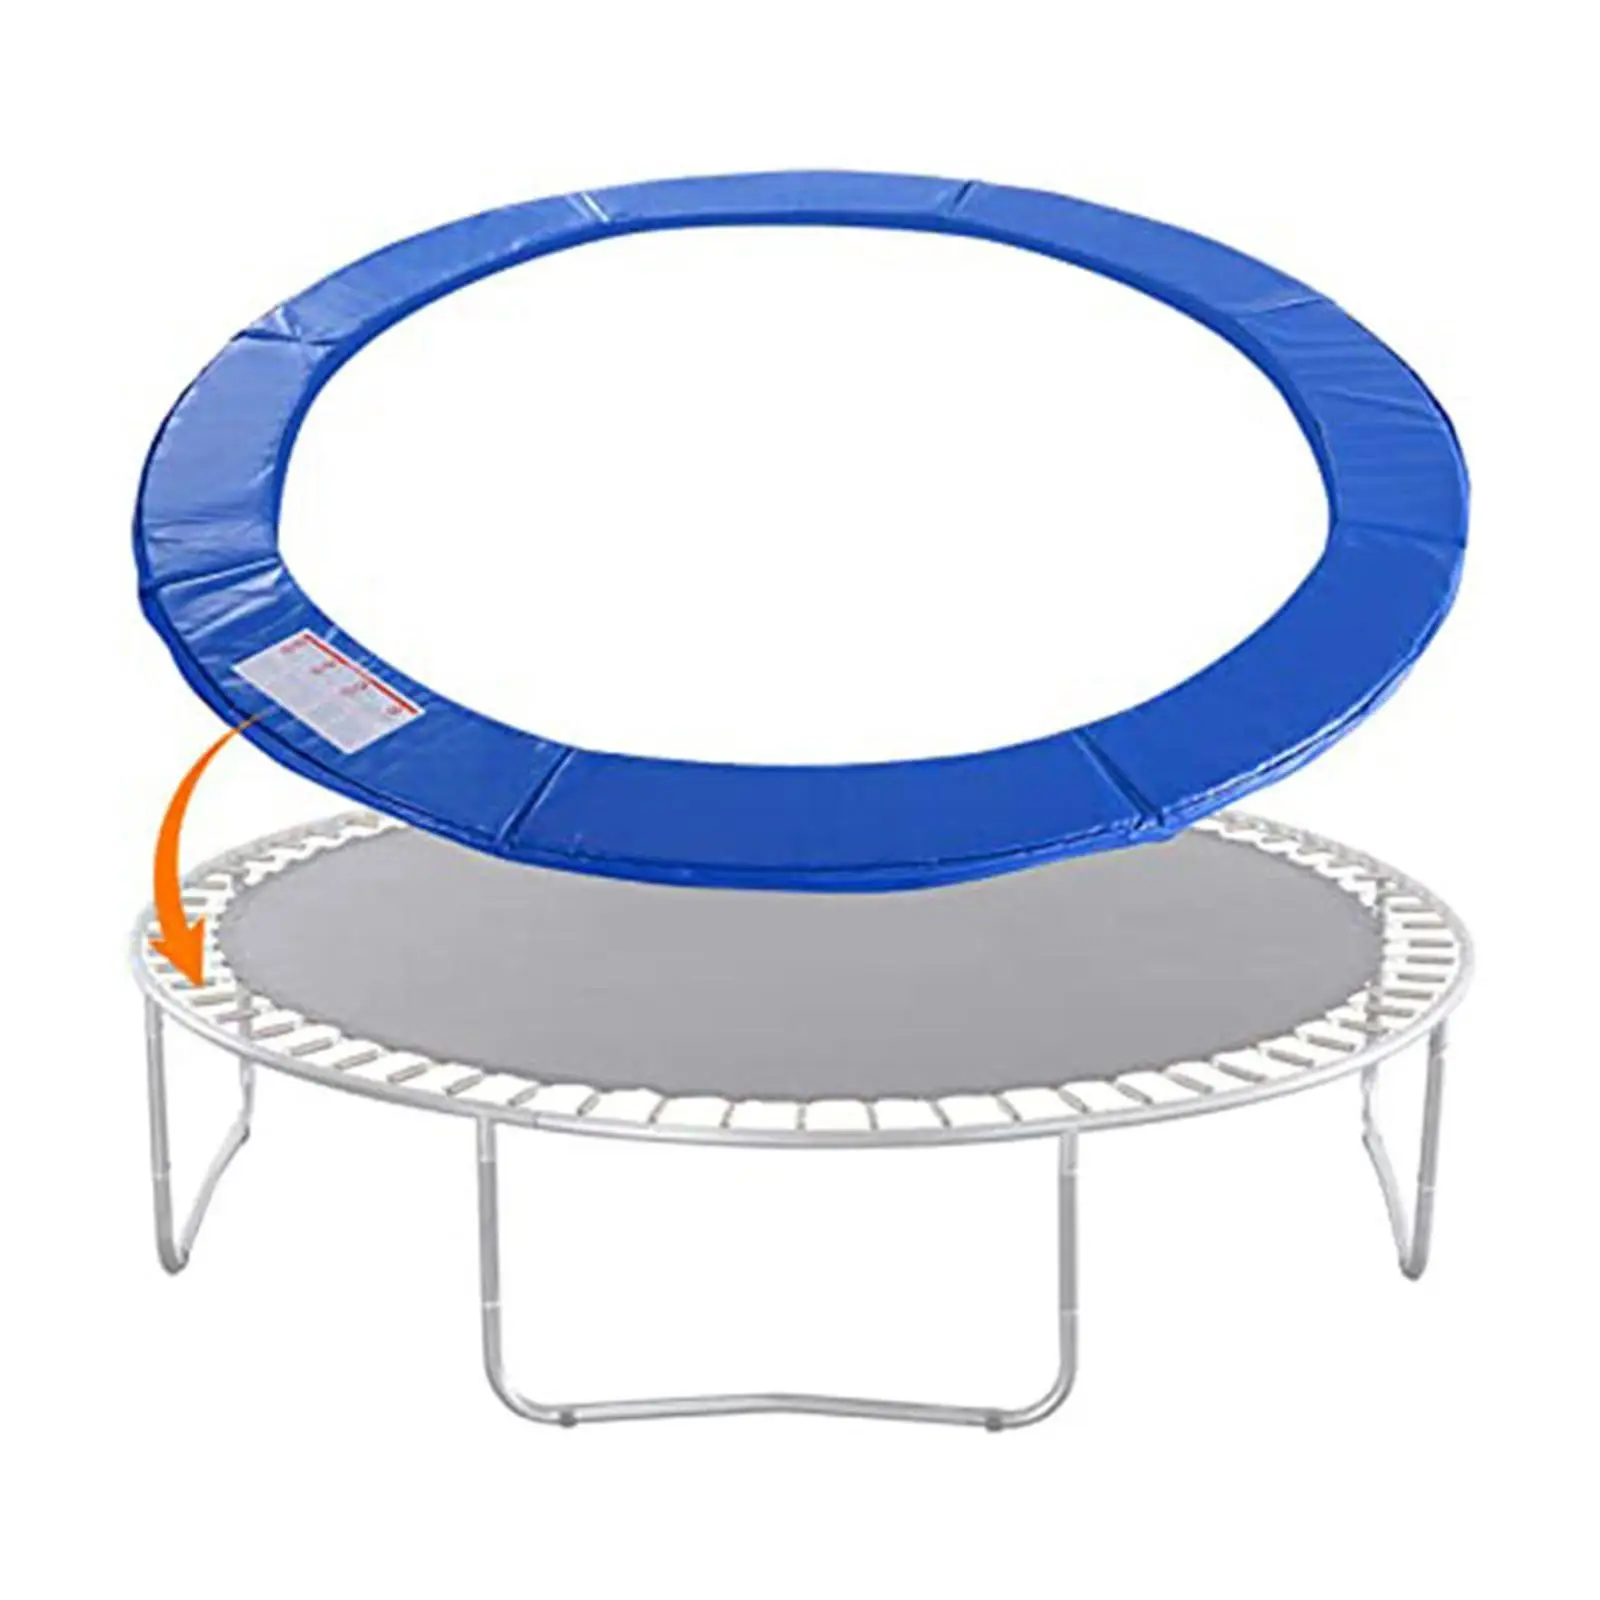 Trampoline Pad Trampoline Edge Cover Replace Jumping Bed Protective Cover Trampoline Accessories Side Guard Spring Cover